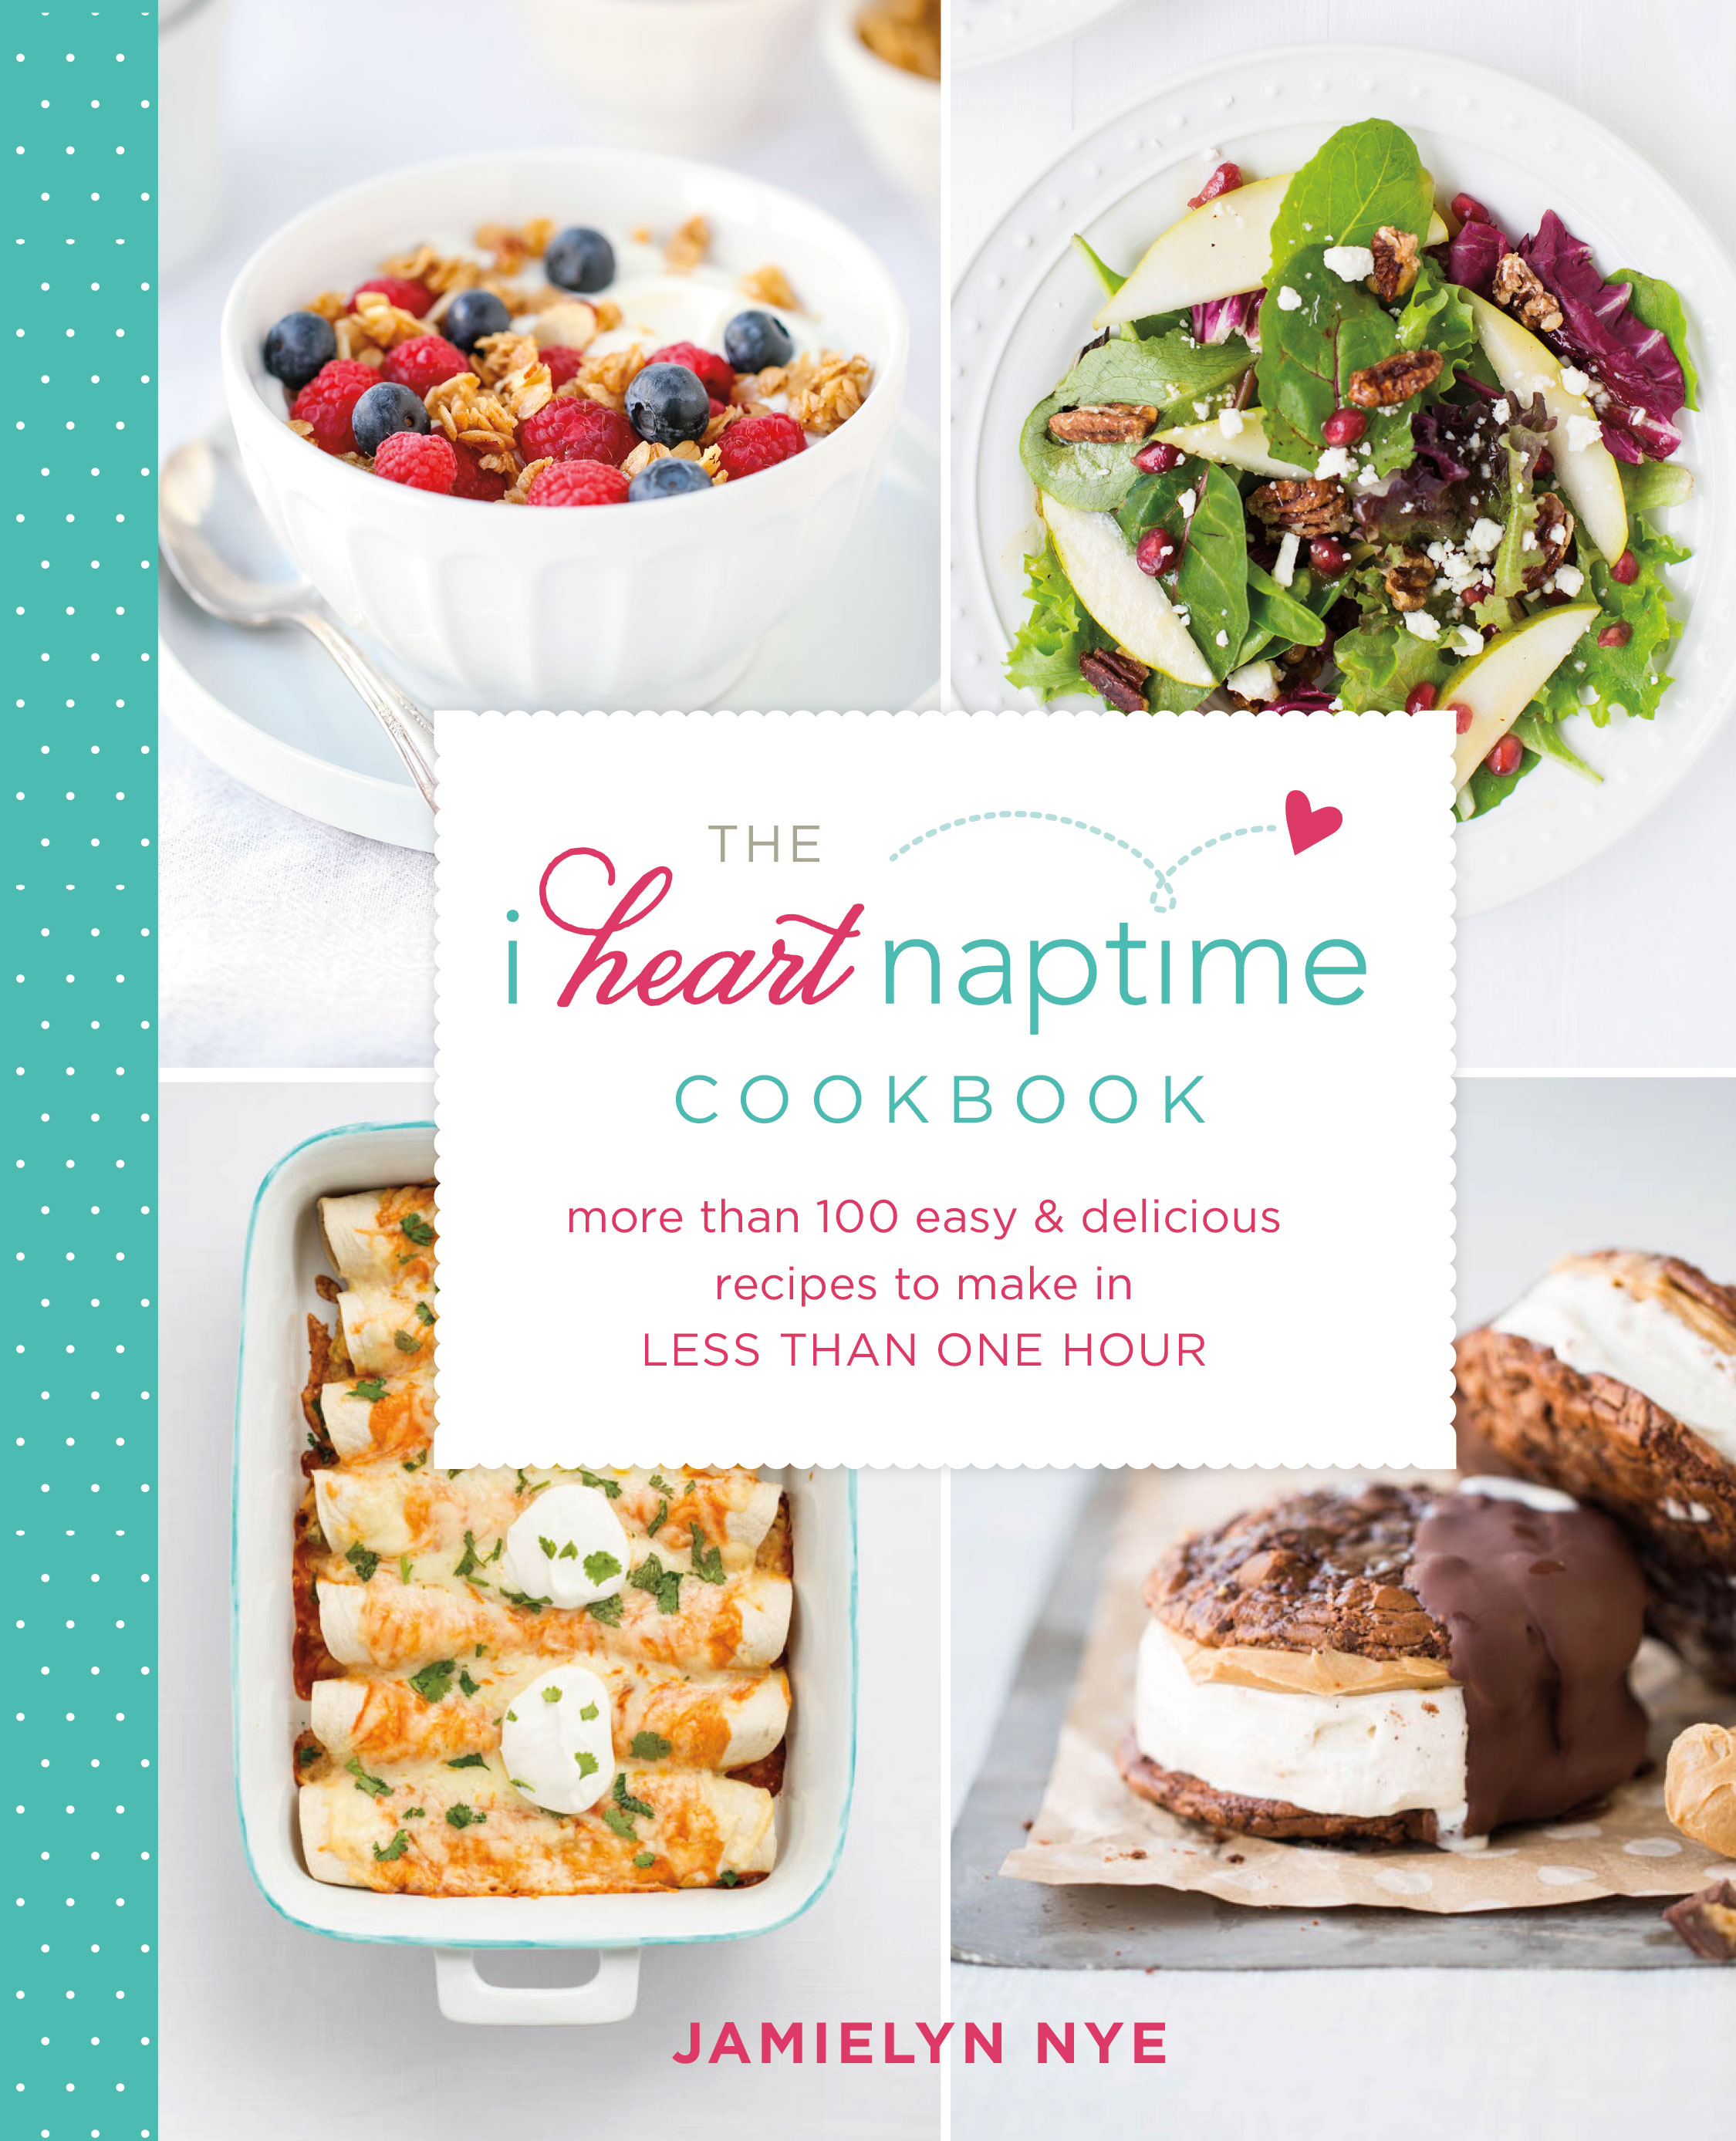 the-i-heart-naptime-cookbook-by-jamielyn-nye-cover